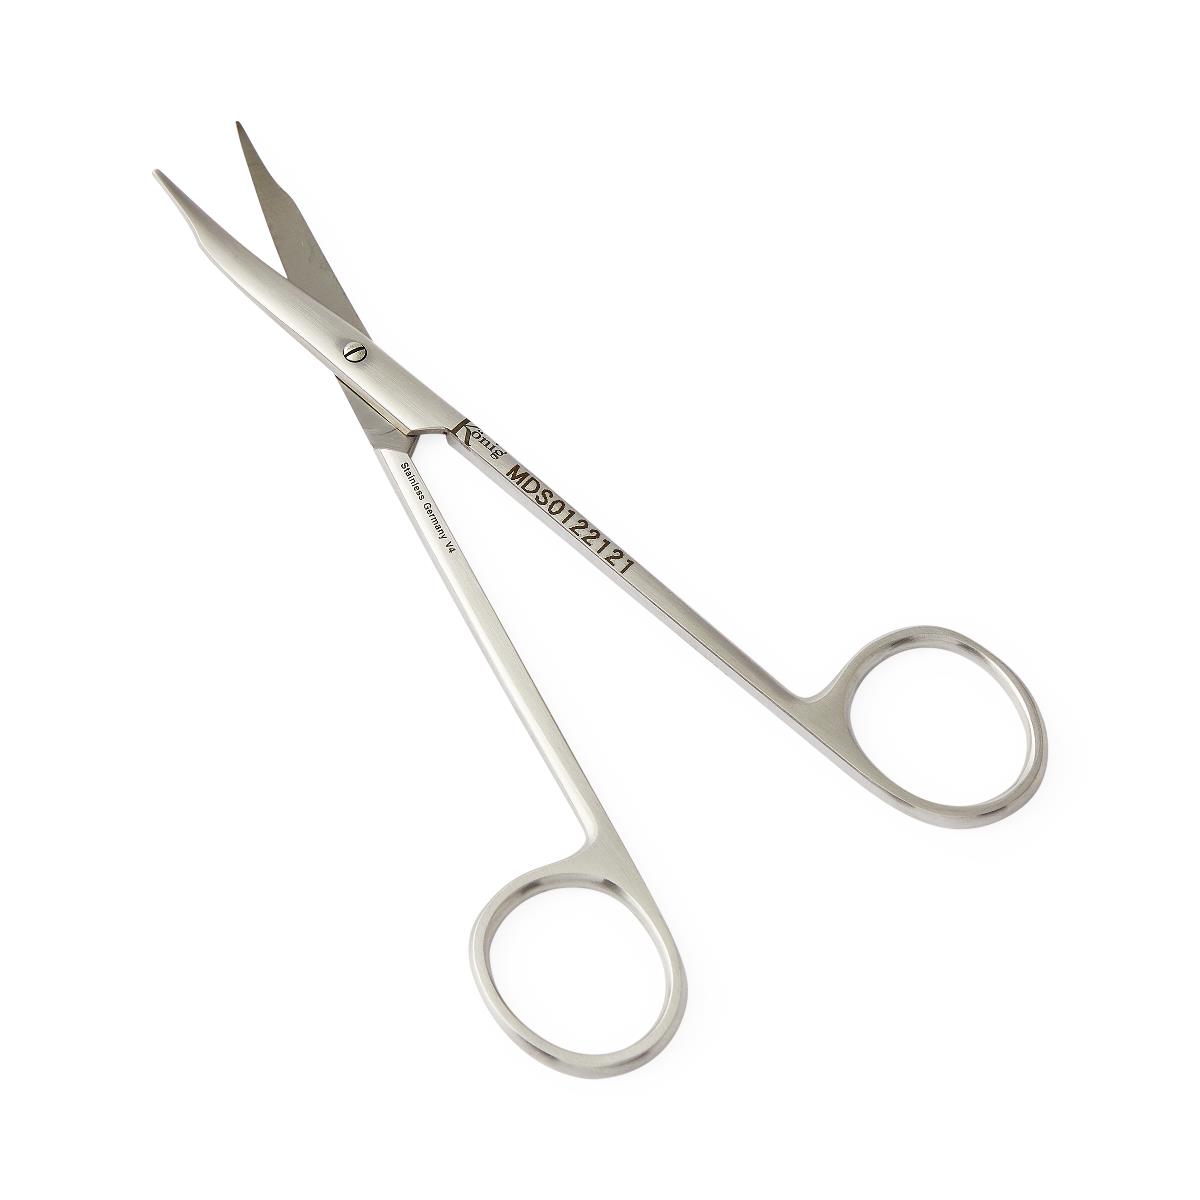 Scissors Spring Handle Type Curved, Surgical instruments